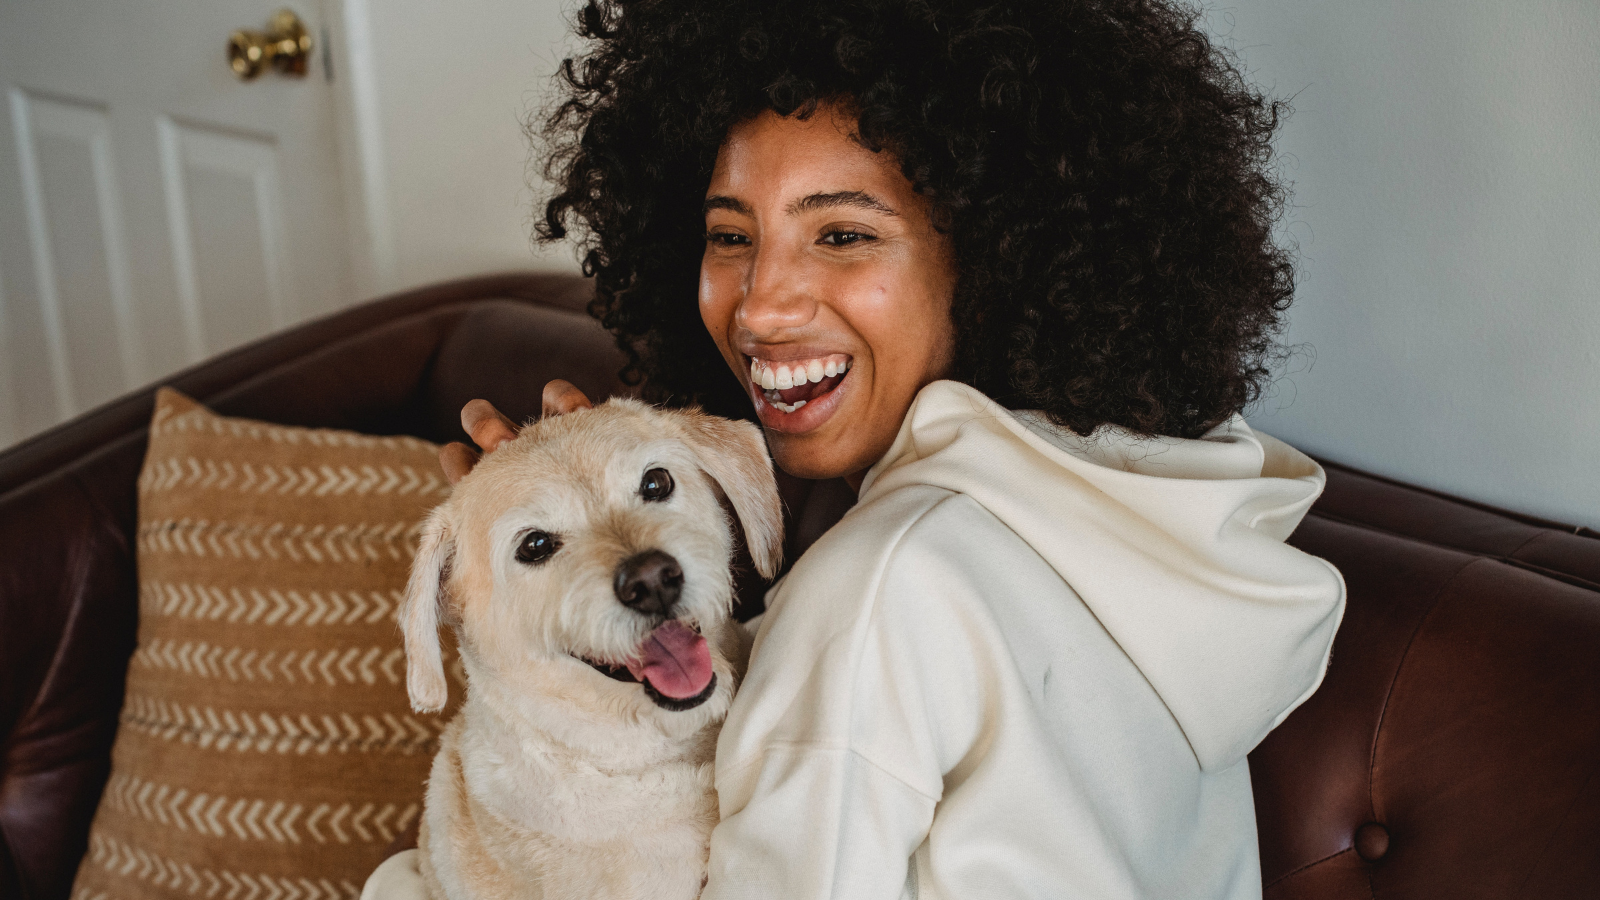 Celebrating Black History Month. A female smiling with her dog.